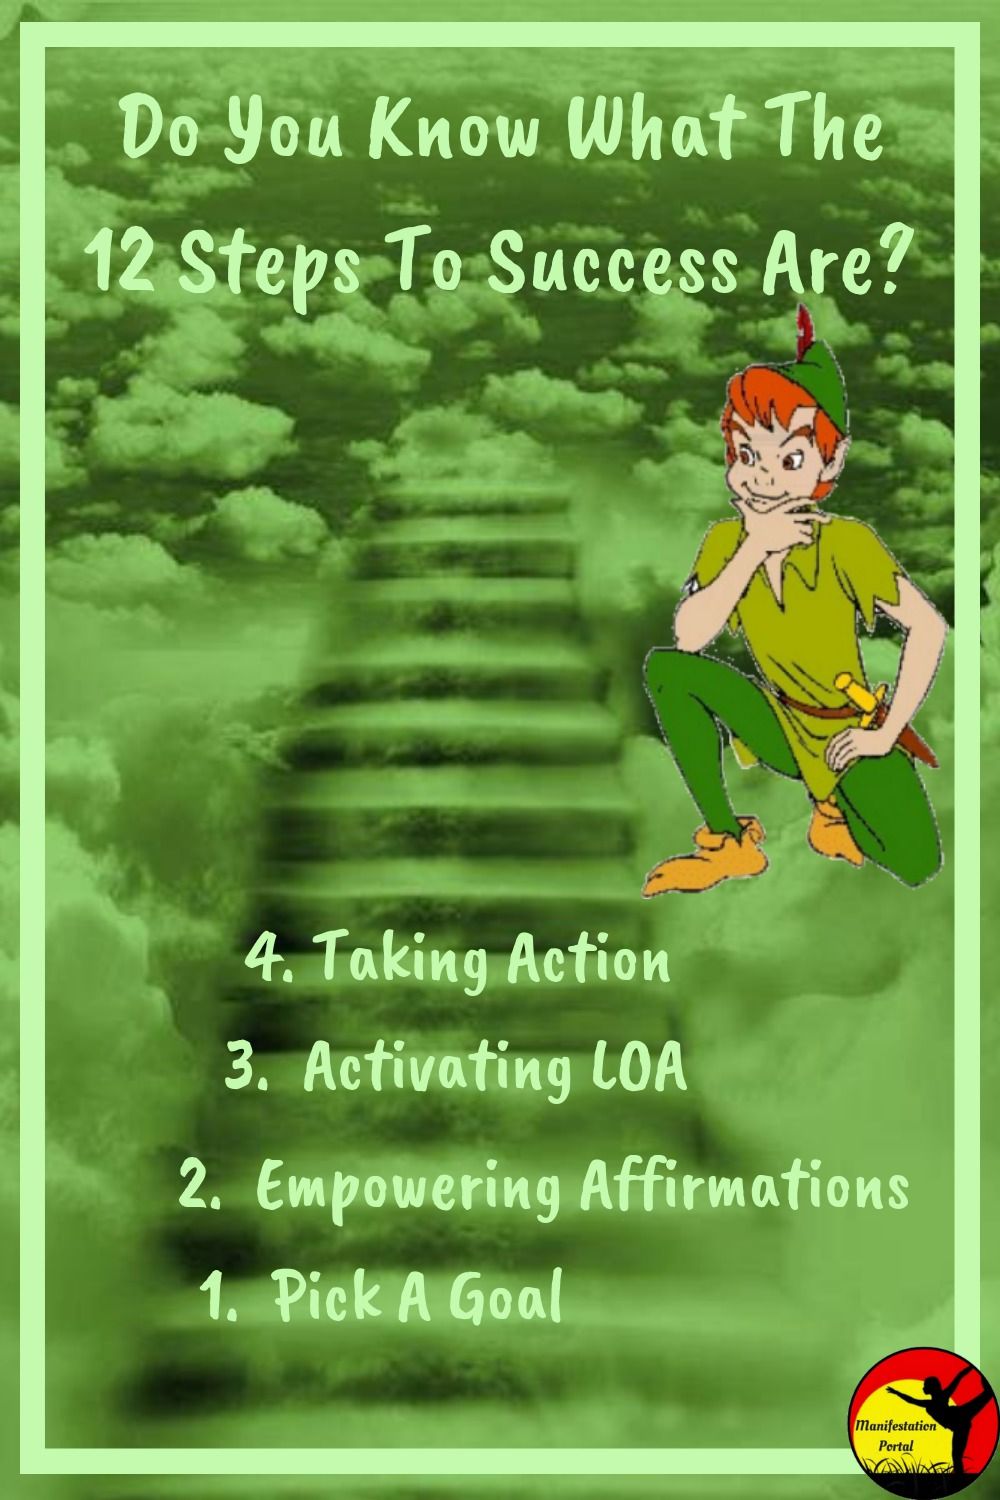 Peter Pan by the steps for success